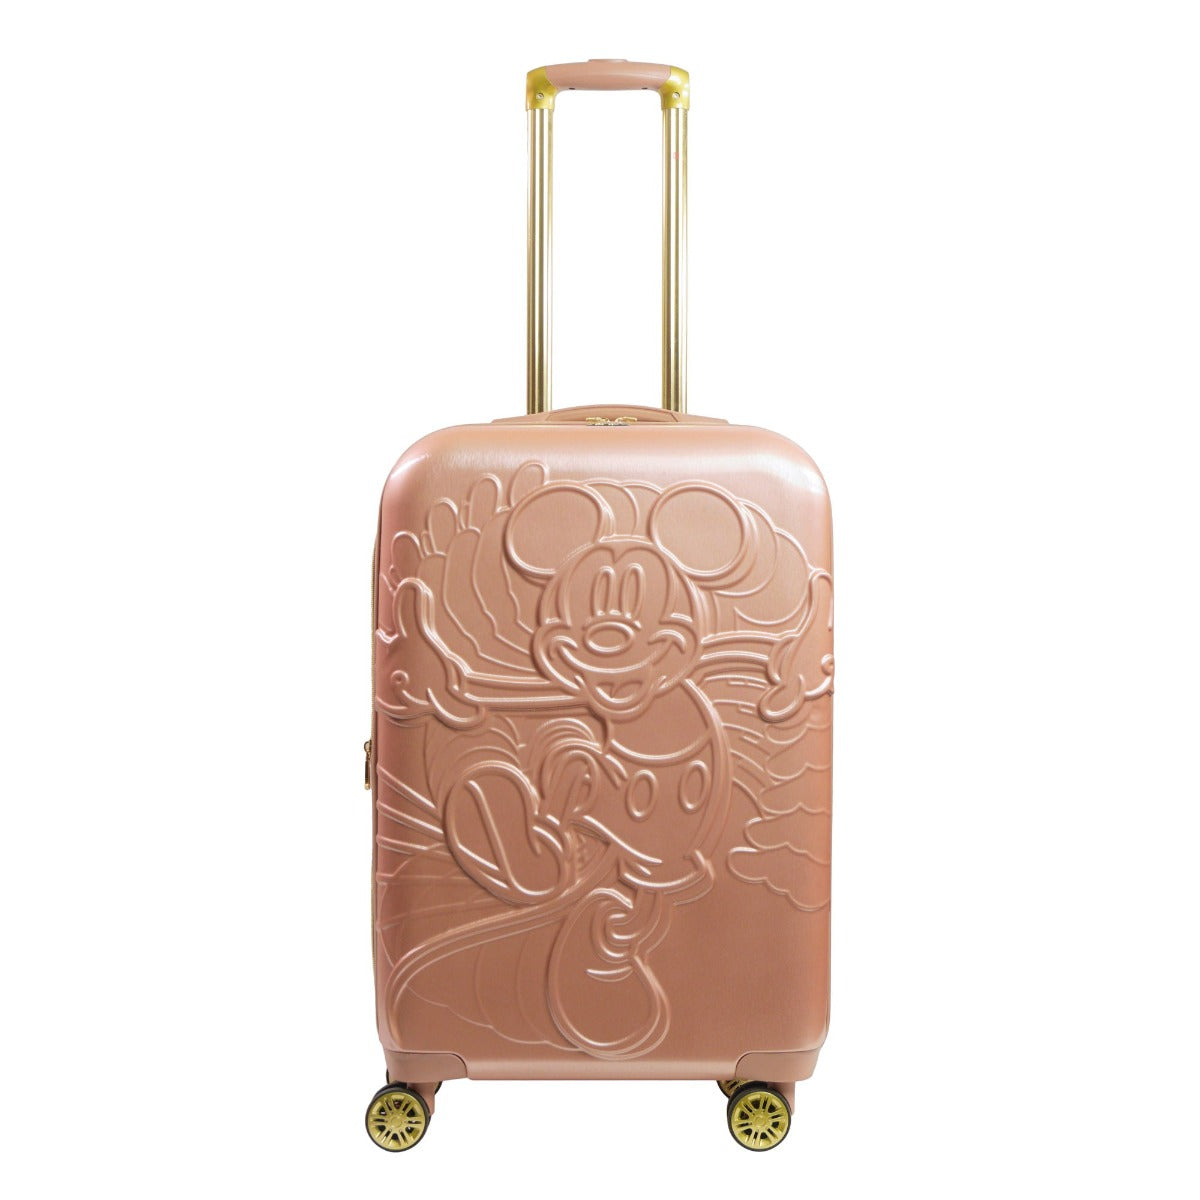 Ful Disney Running Mickey Mouse 26 inch Spinner Suitcase Rose Gold Pink retractable handle checked luggage